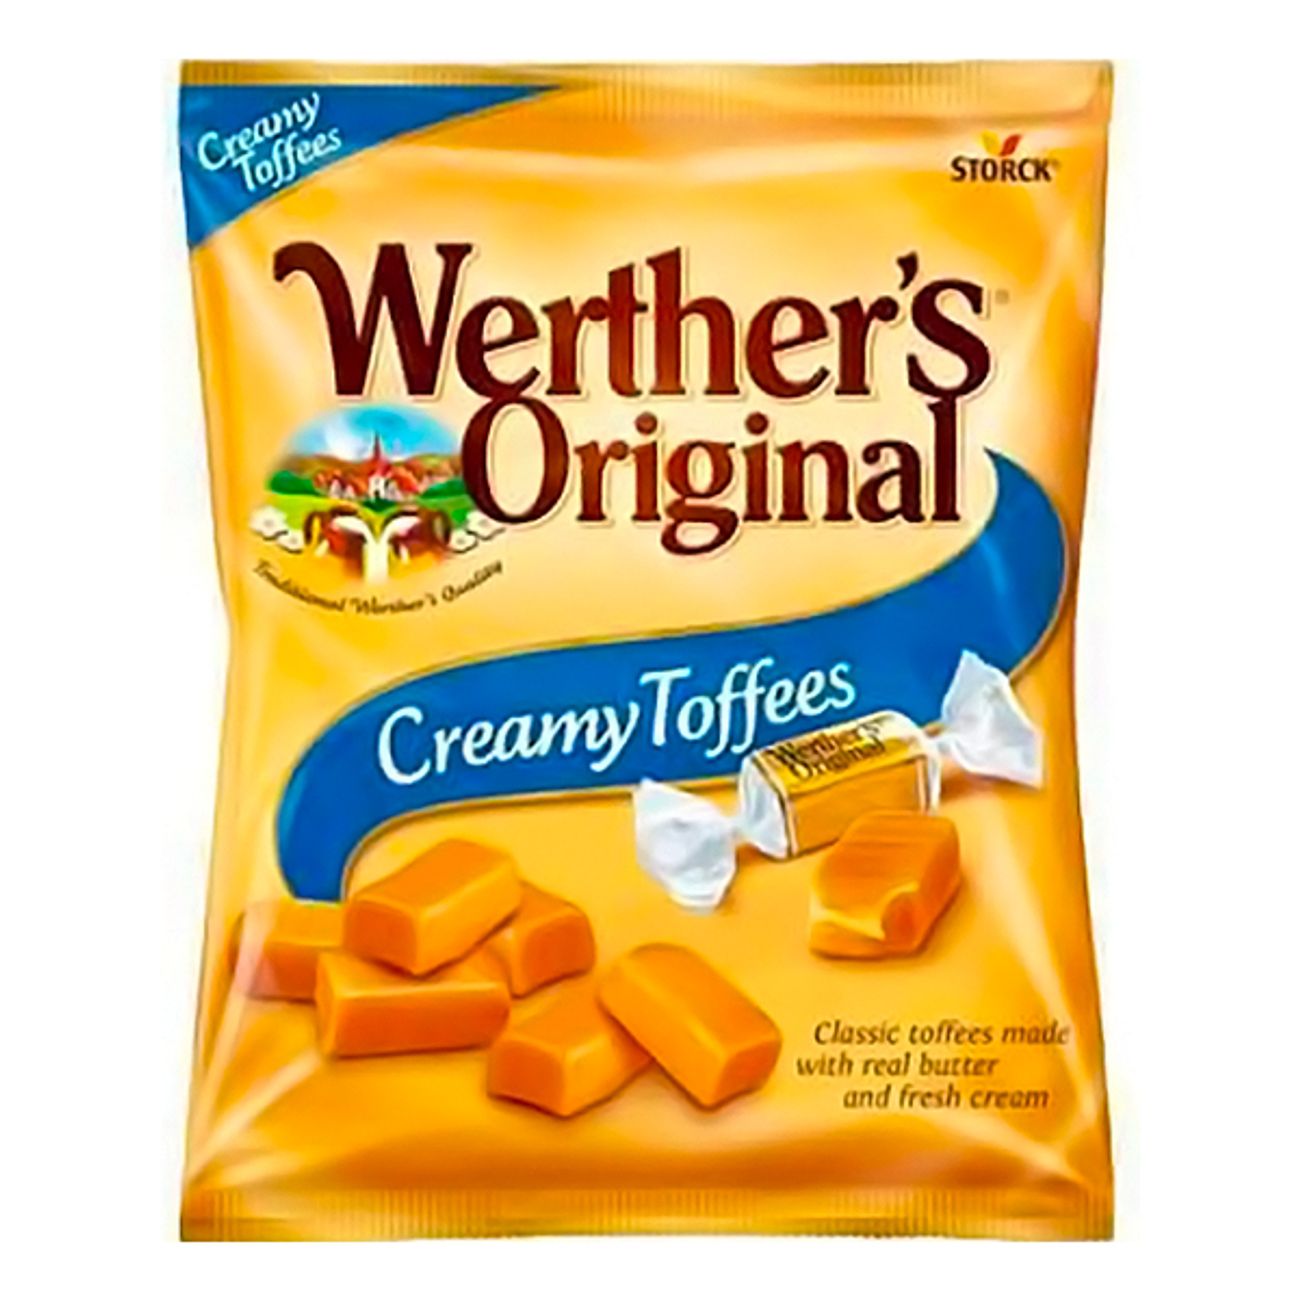 Werthers Original Creamy Toffees 135g x 15 - Nyhet 27.09